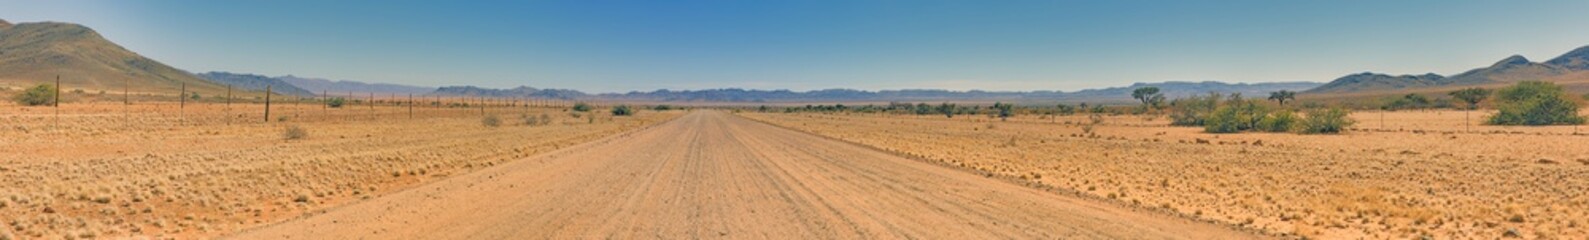 Panoramic picture over a gravel road through the desert like steppe with red sand in southern Namibia under a blue sky